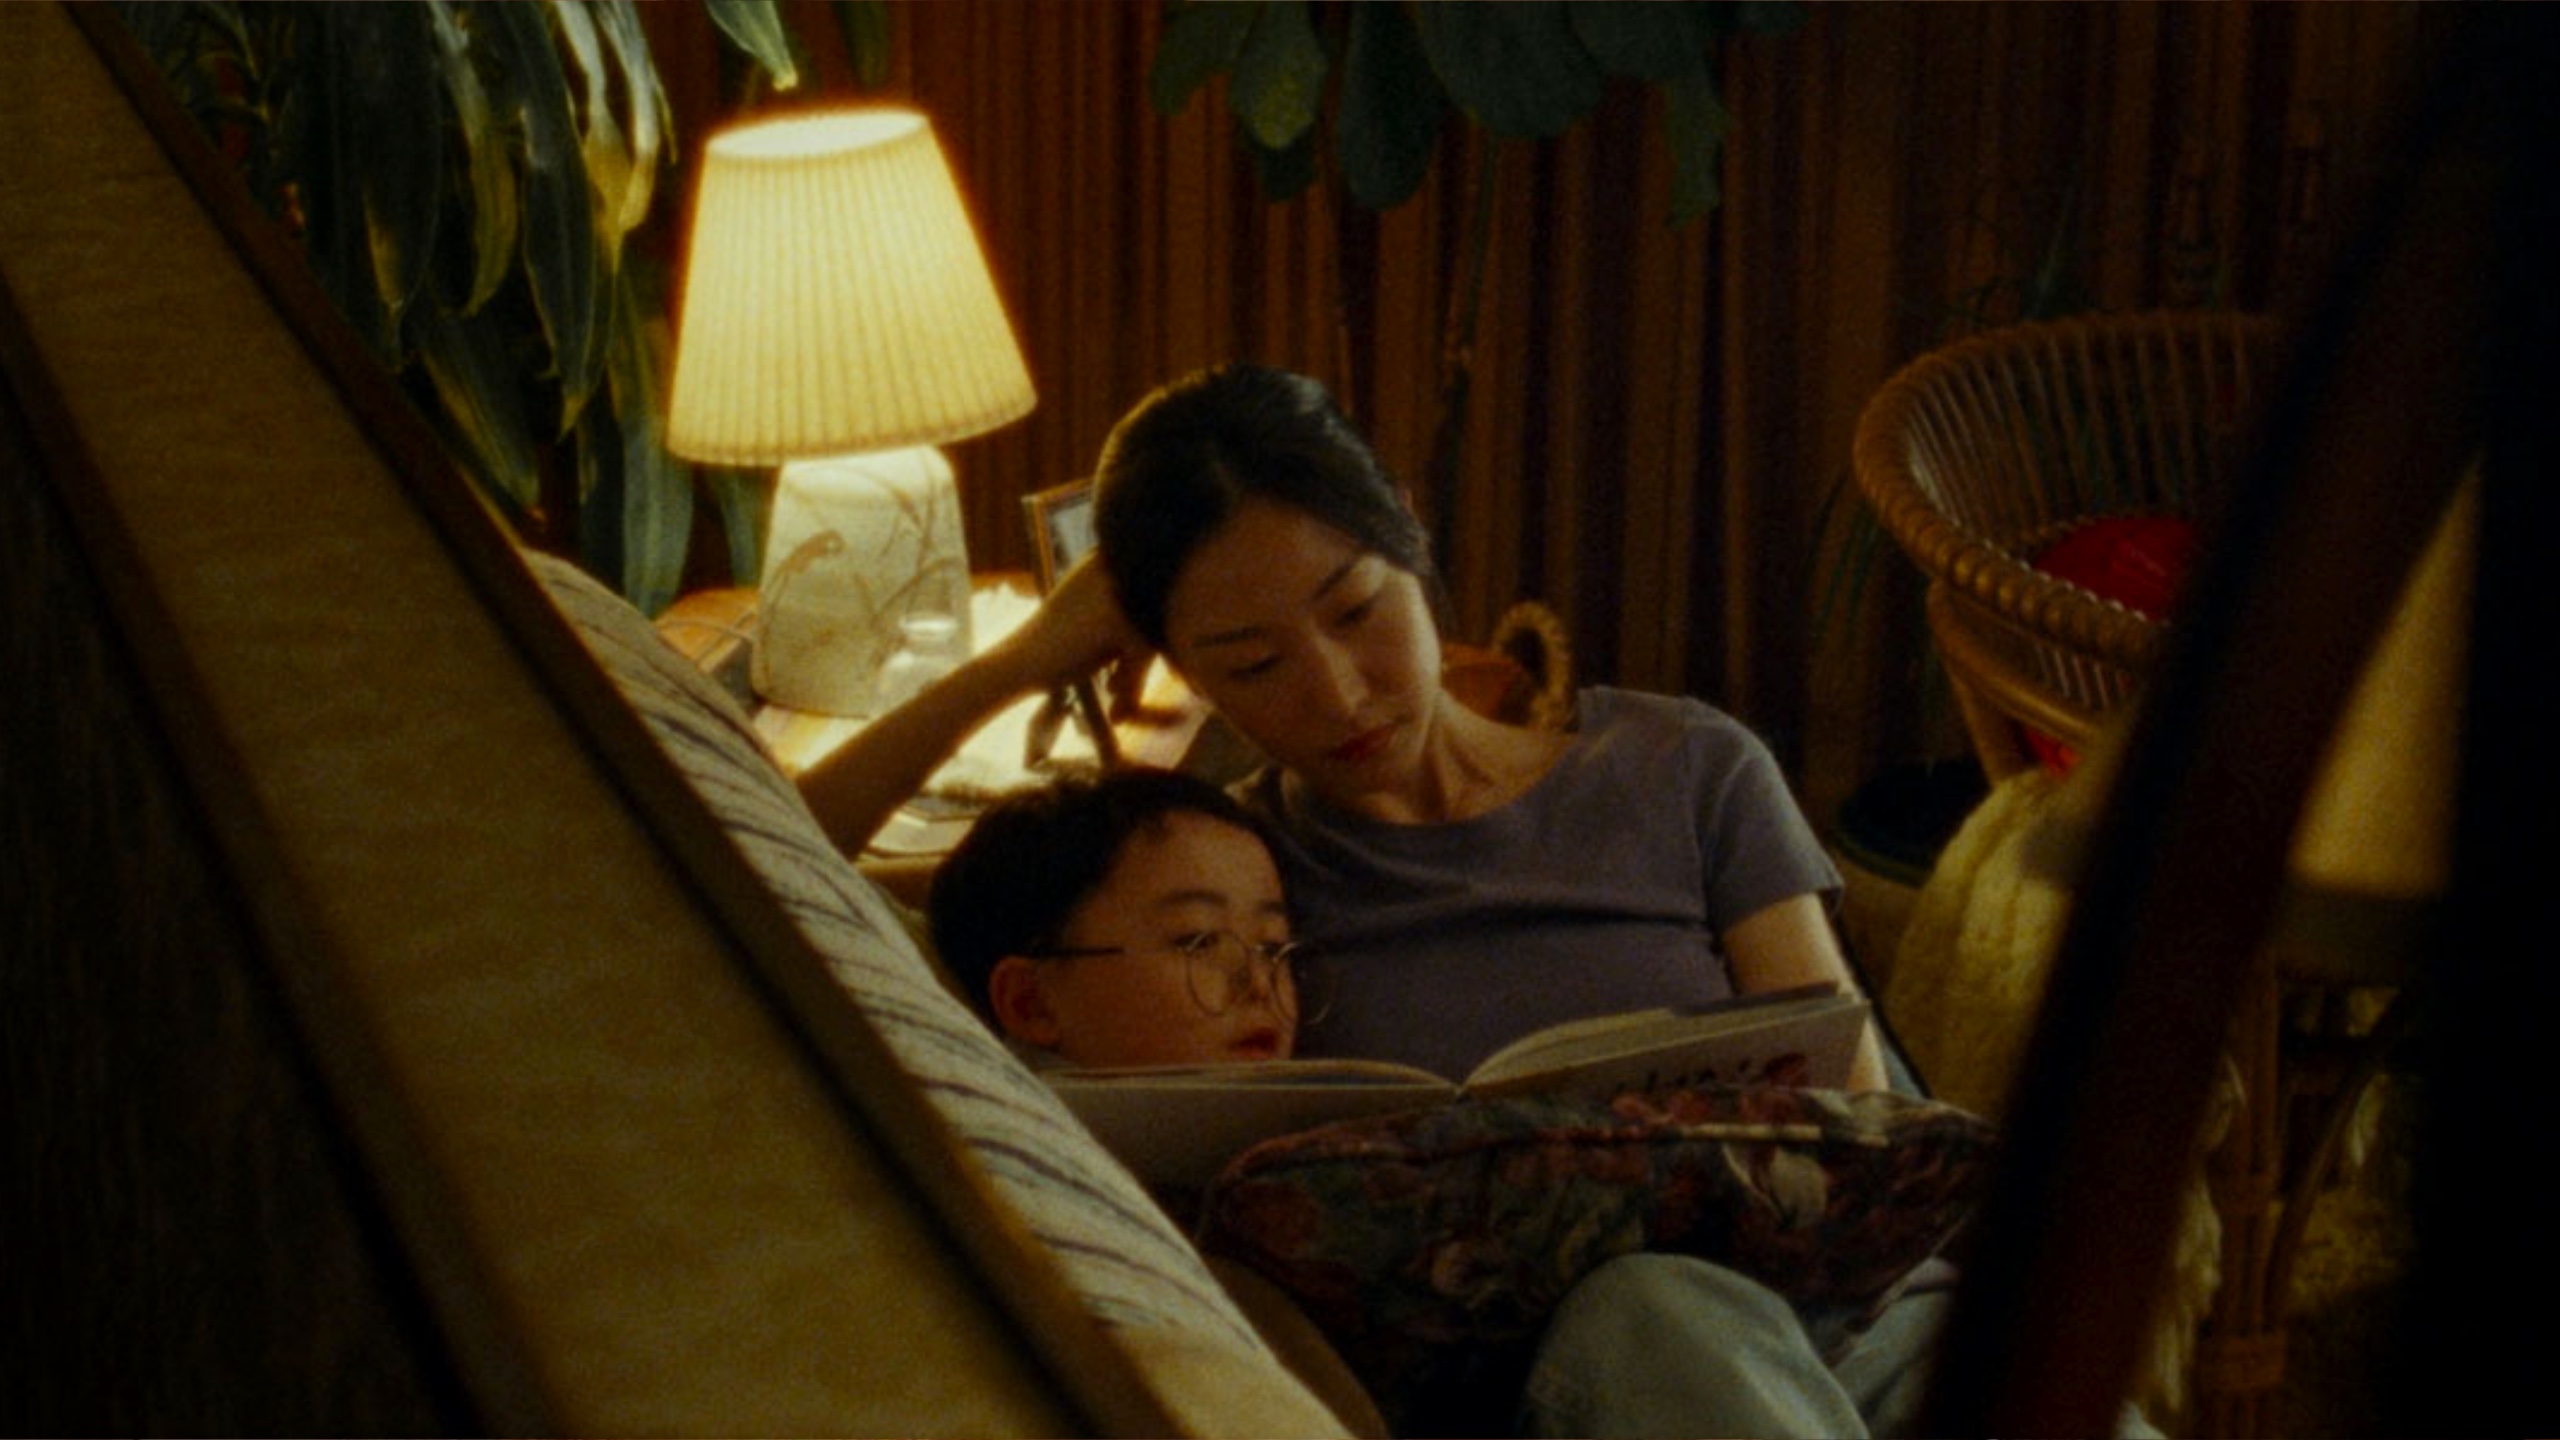 A mother and son laying on a couch reading a book in a dimly lit room